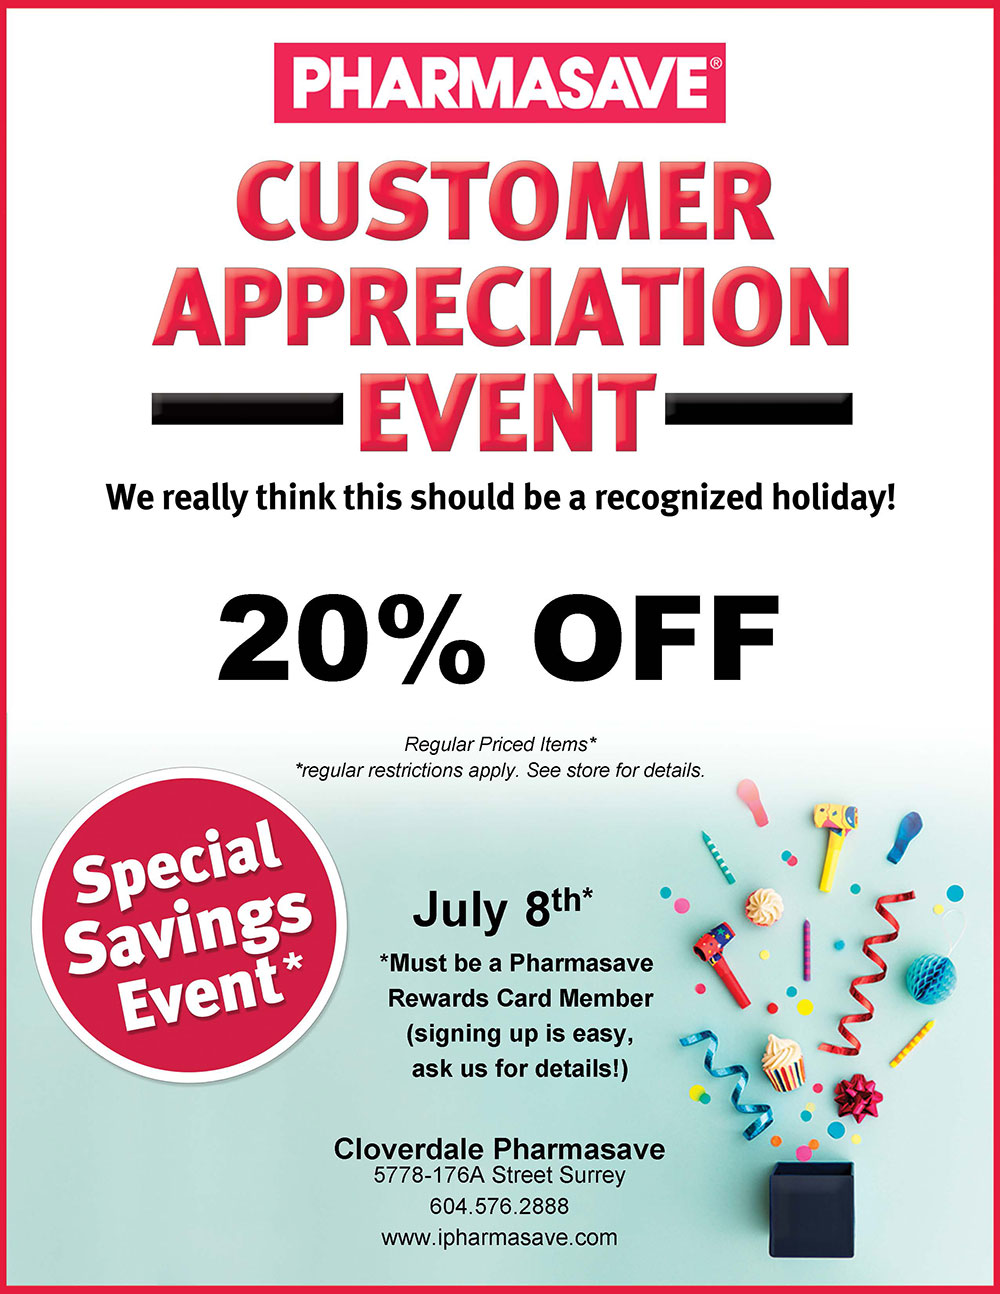 customer appreciation day is July 8th, 2021 at steveston pharmasave get 20% off almost all regular priced products